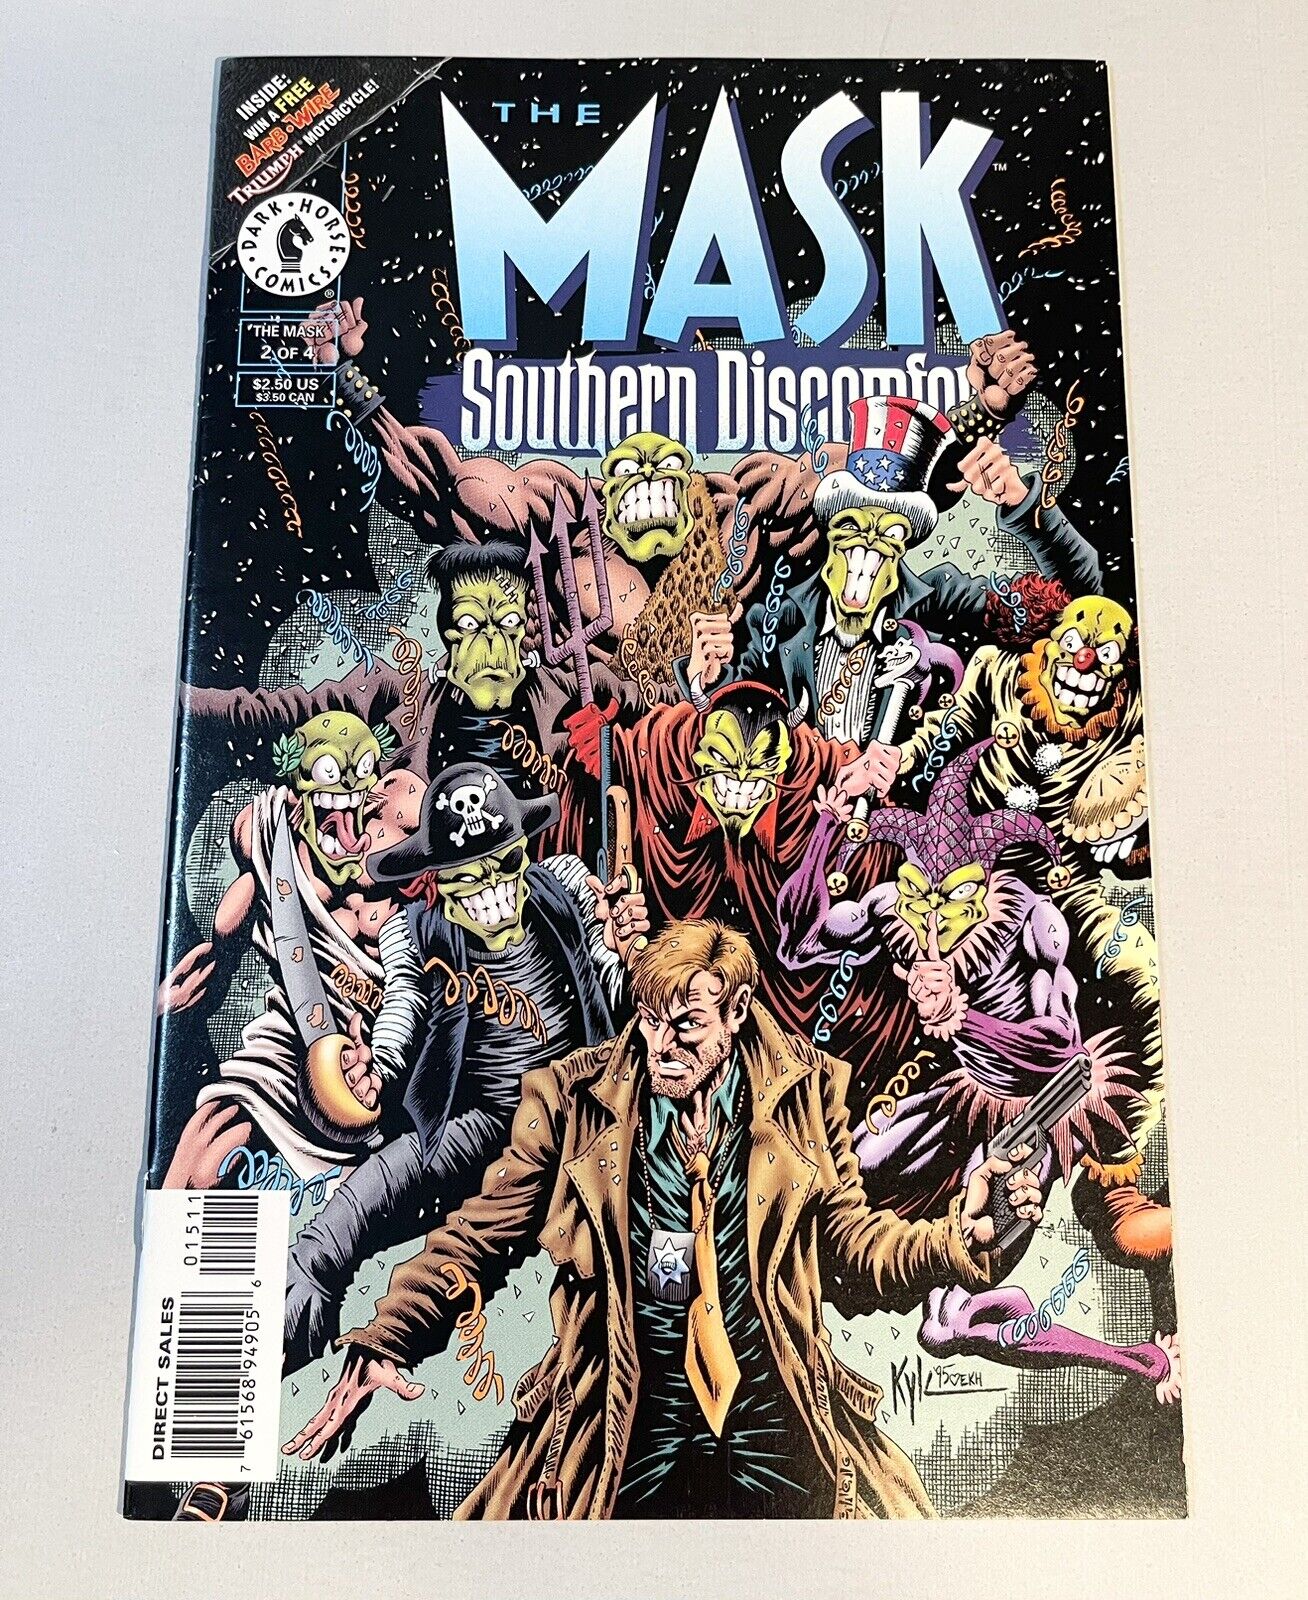 THE MASK SOUTHERN DISCOMFORT #2 of 4 (1996) Dark Horse Comics VF/NM